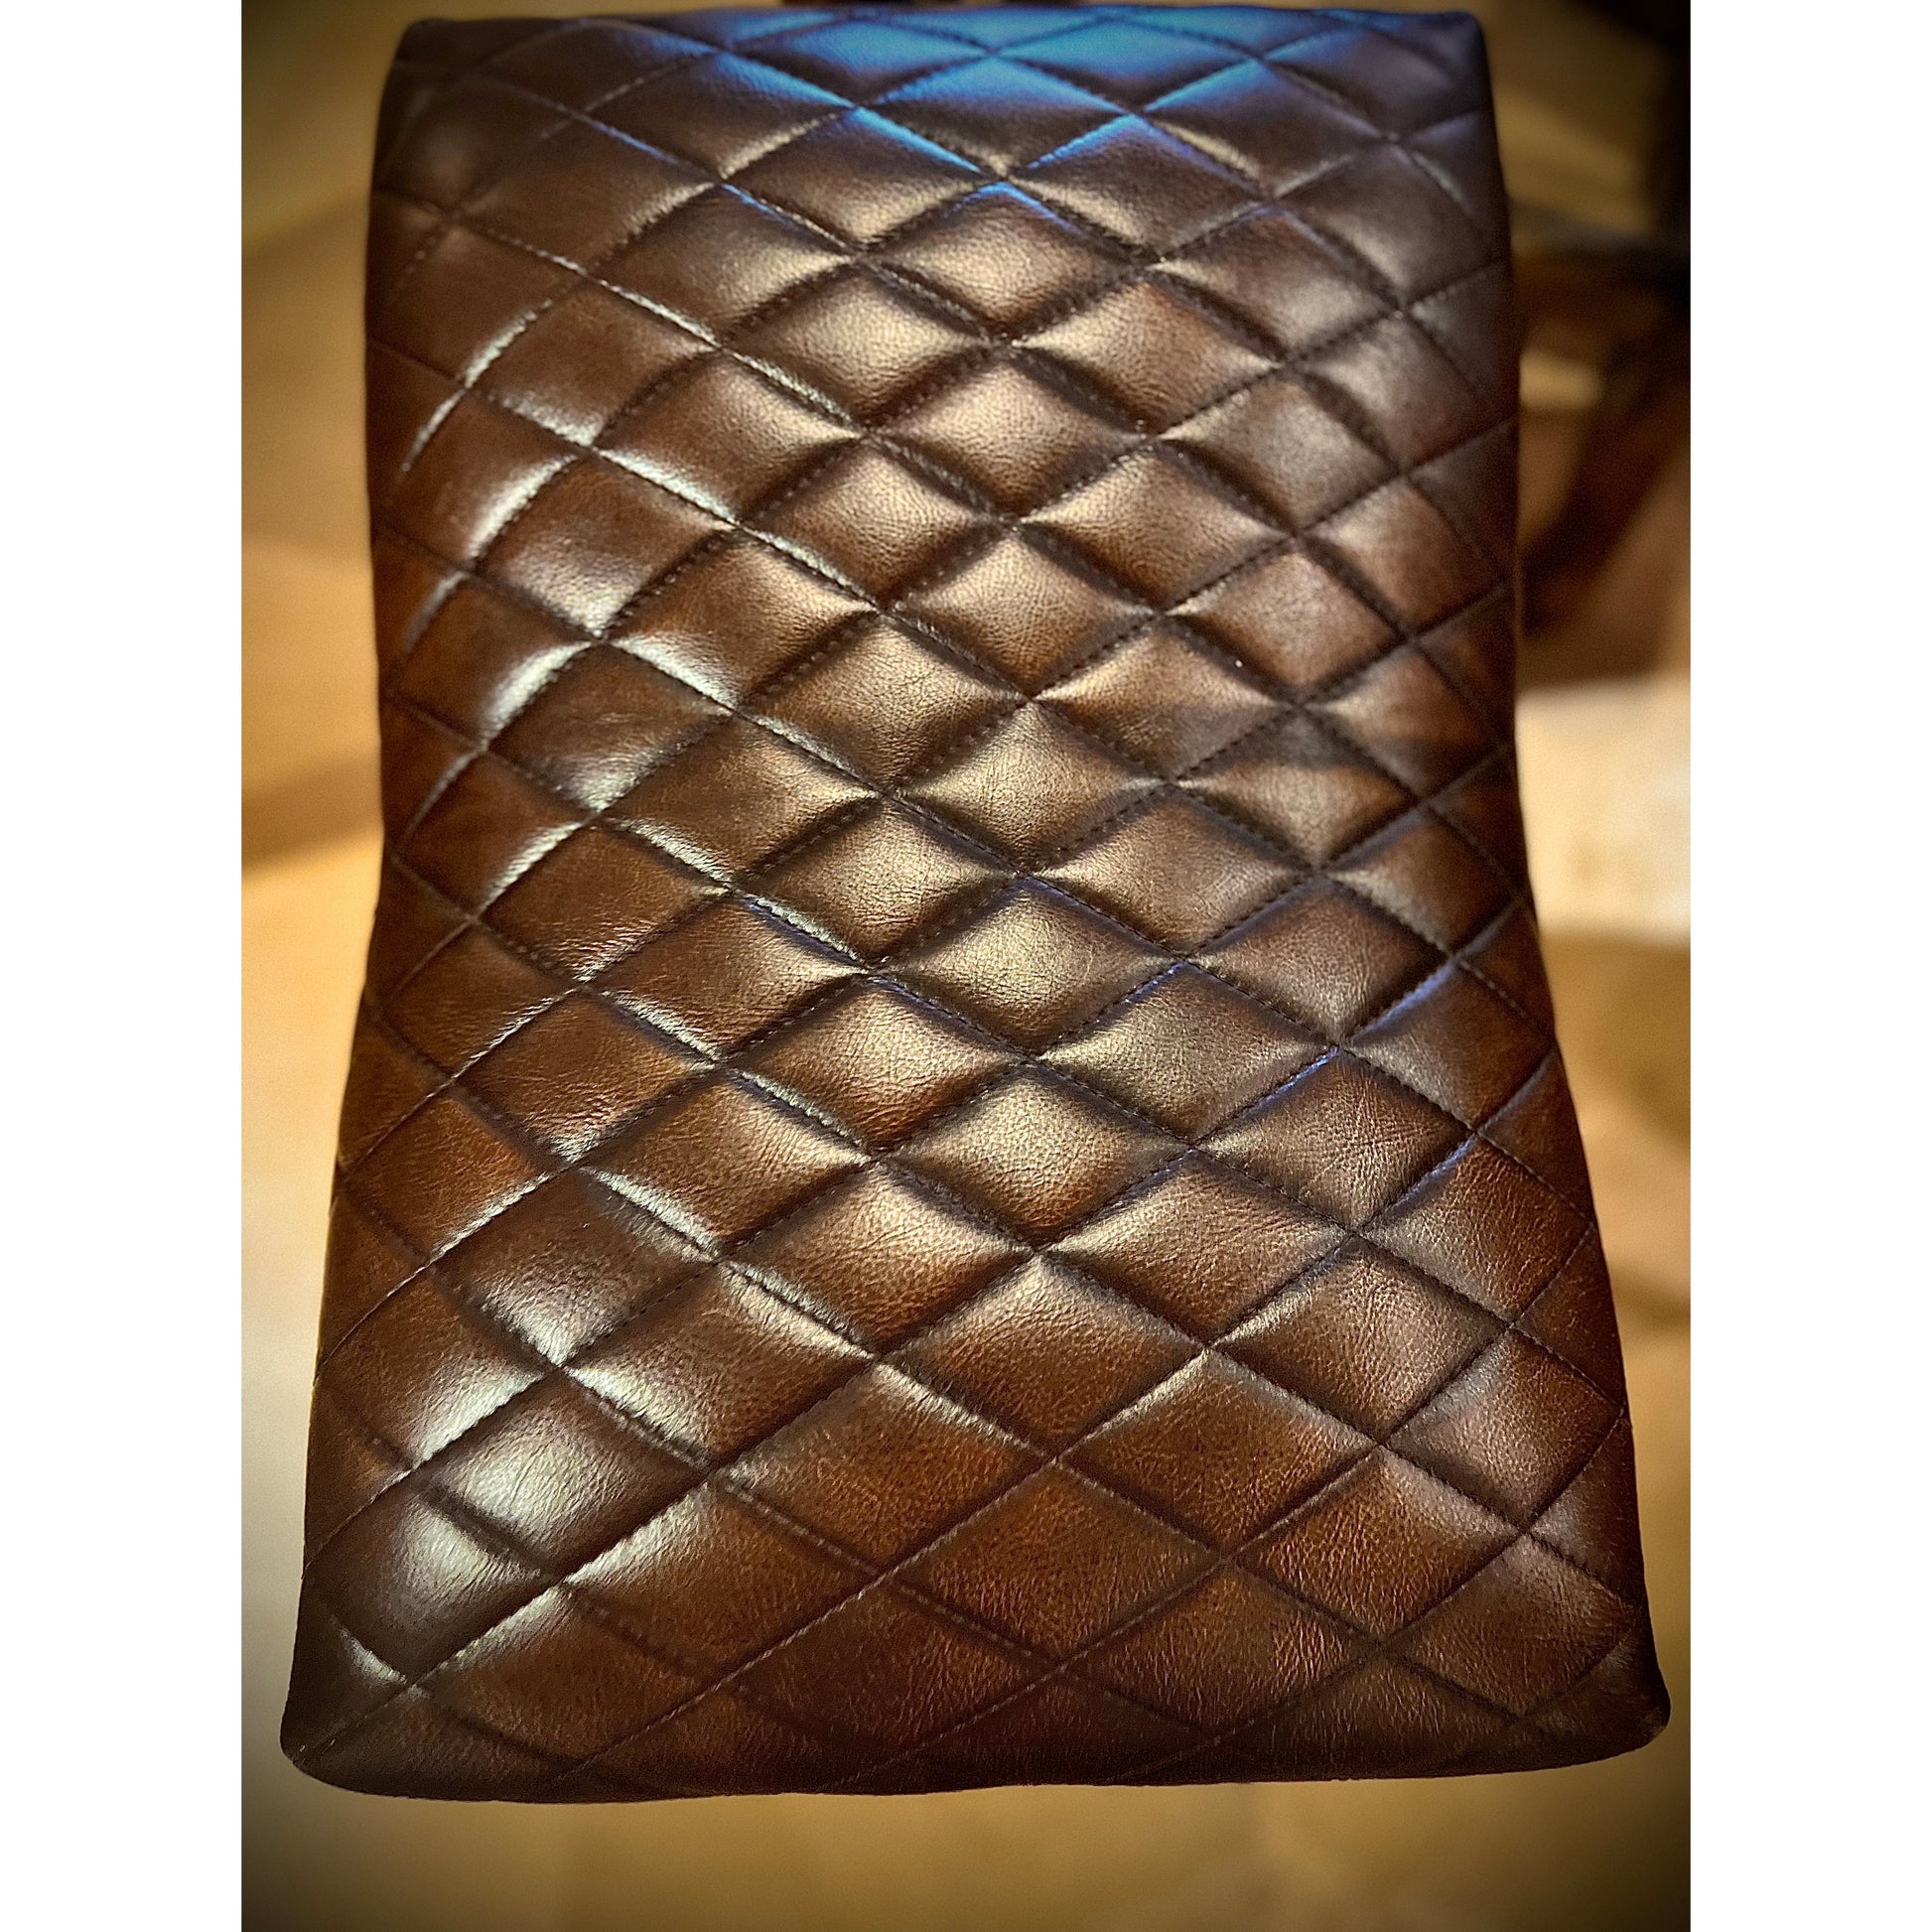 Introducing the Diamond Stitch Santana Saddle Stool. With its diamond stitch leather, this stool offers a touch of Western charm while providing exceptional comfort. A perfect addition to any home or office space.